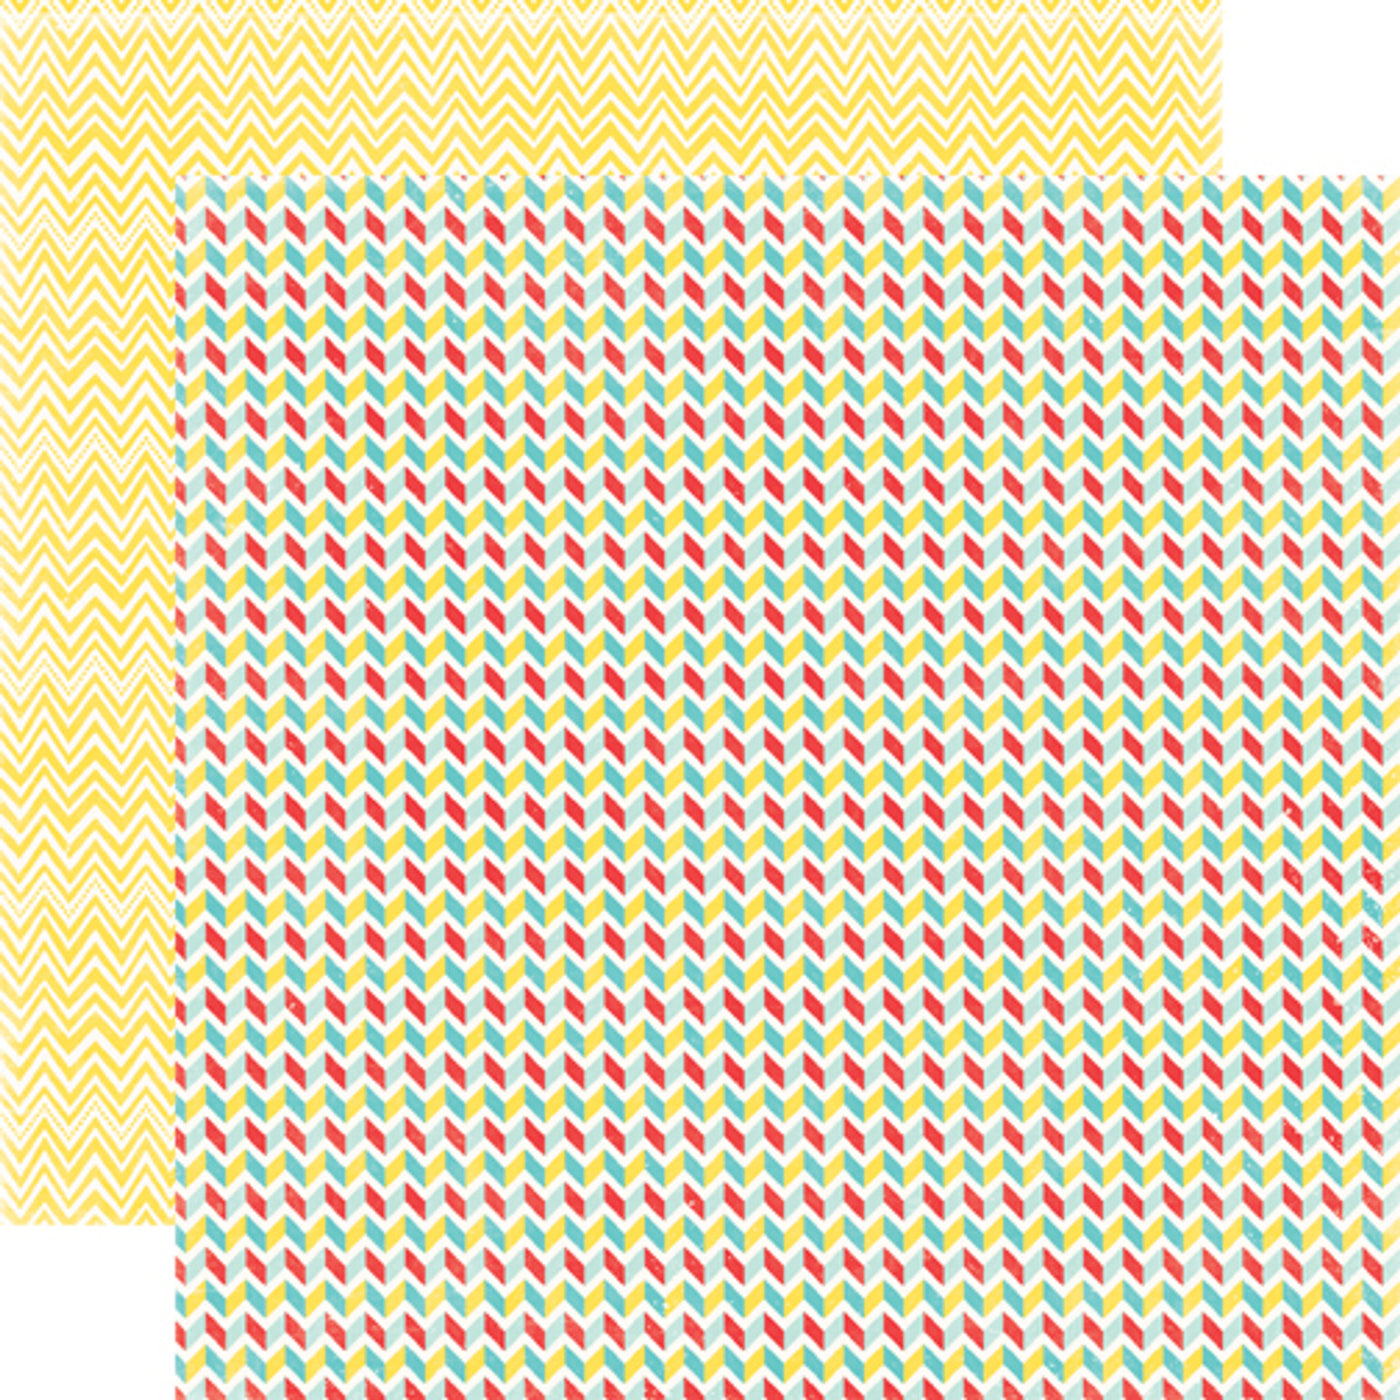 12x12 double-sided sheet. (Side A - fun, colorful, chevron pattern paper in pink, yellow, and turquoise on a white background; Side B - yellow and white chevron pattern) Archival quality, acid-free.